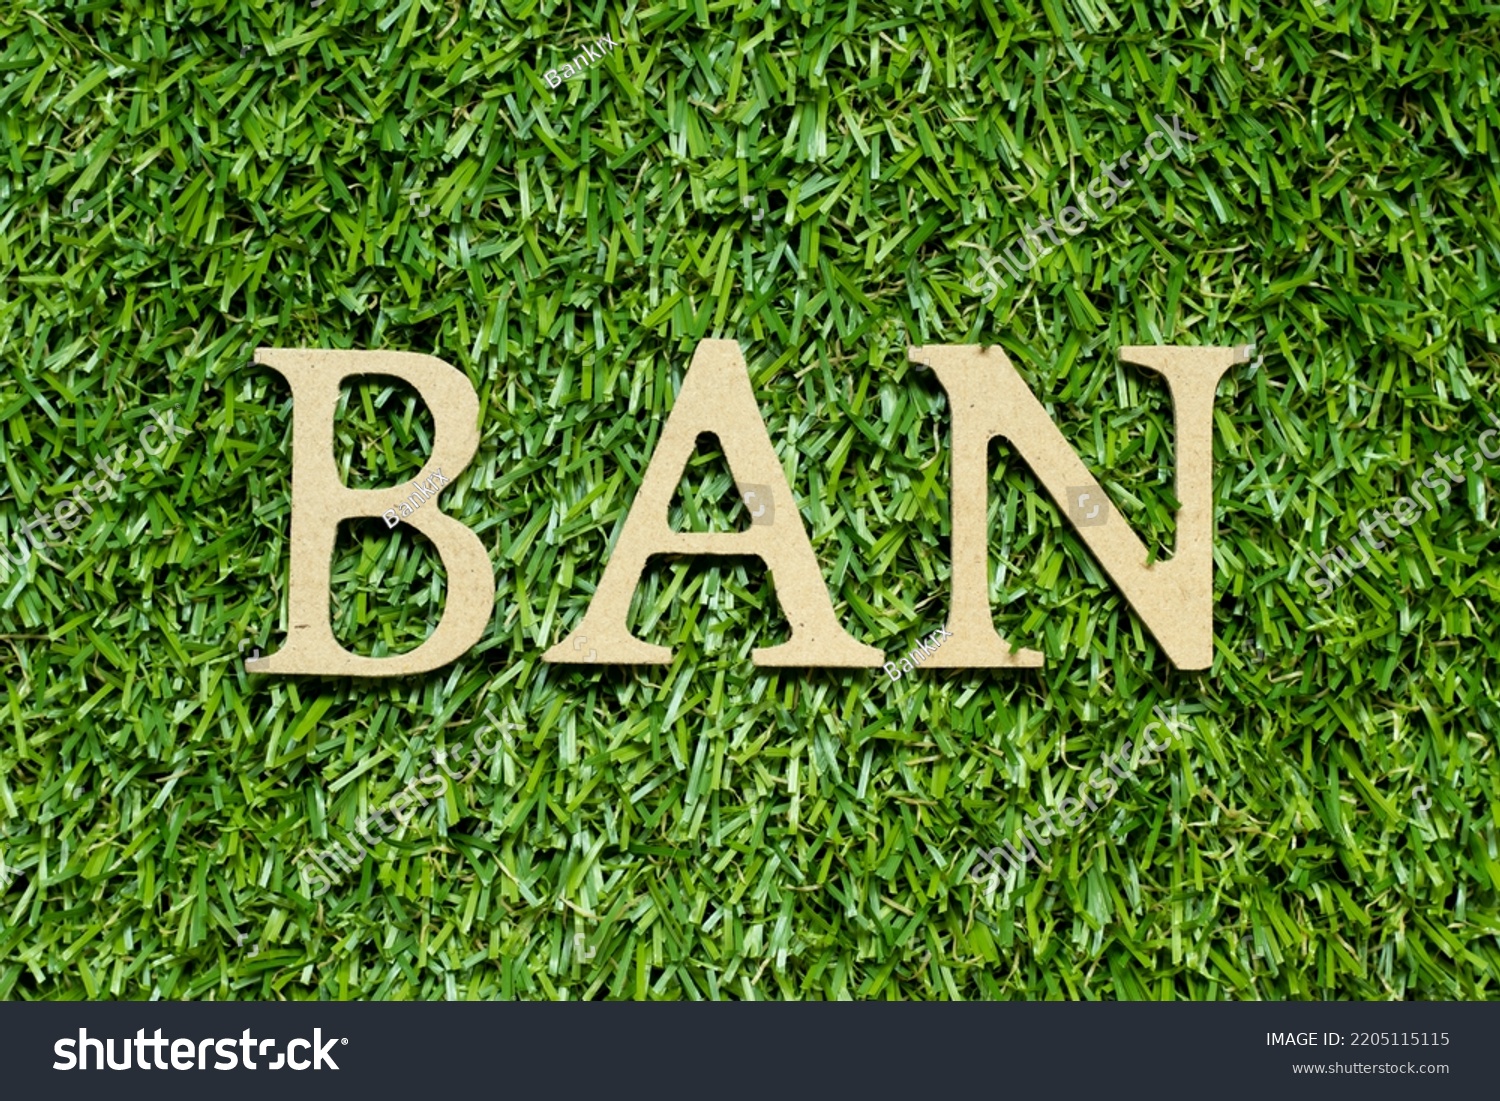 Wood alphabet letter in word ban on green grass background #2205115115